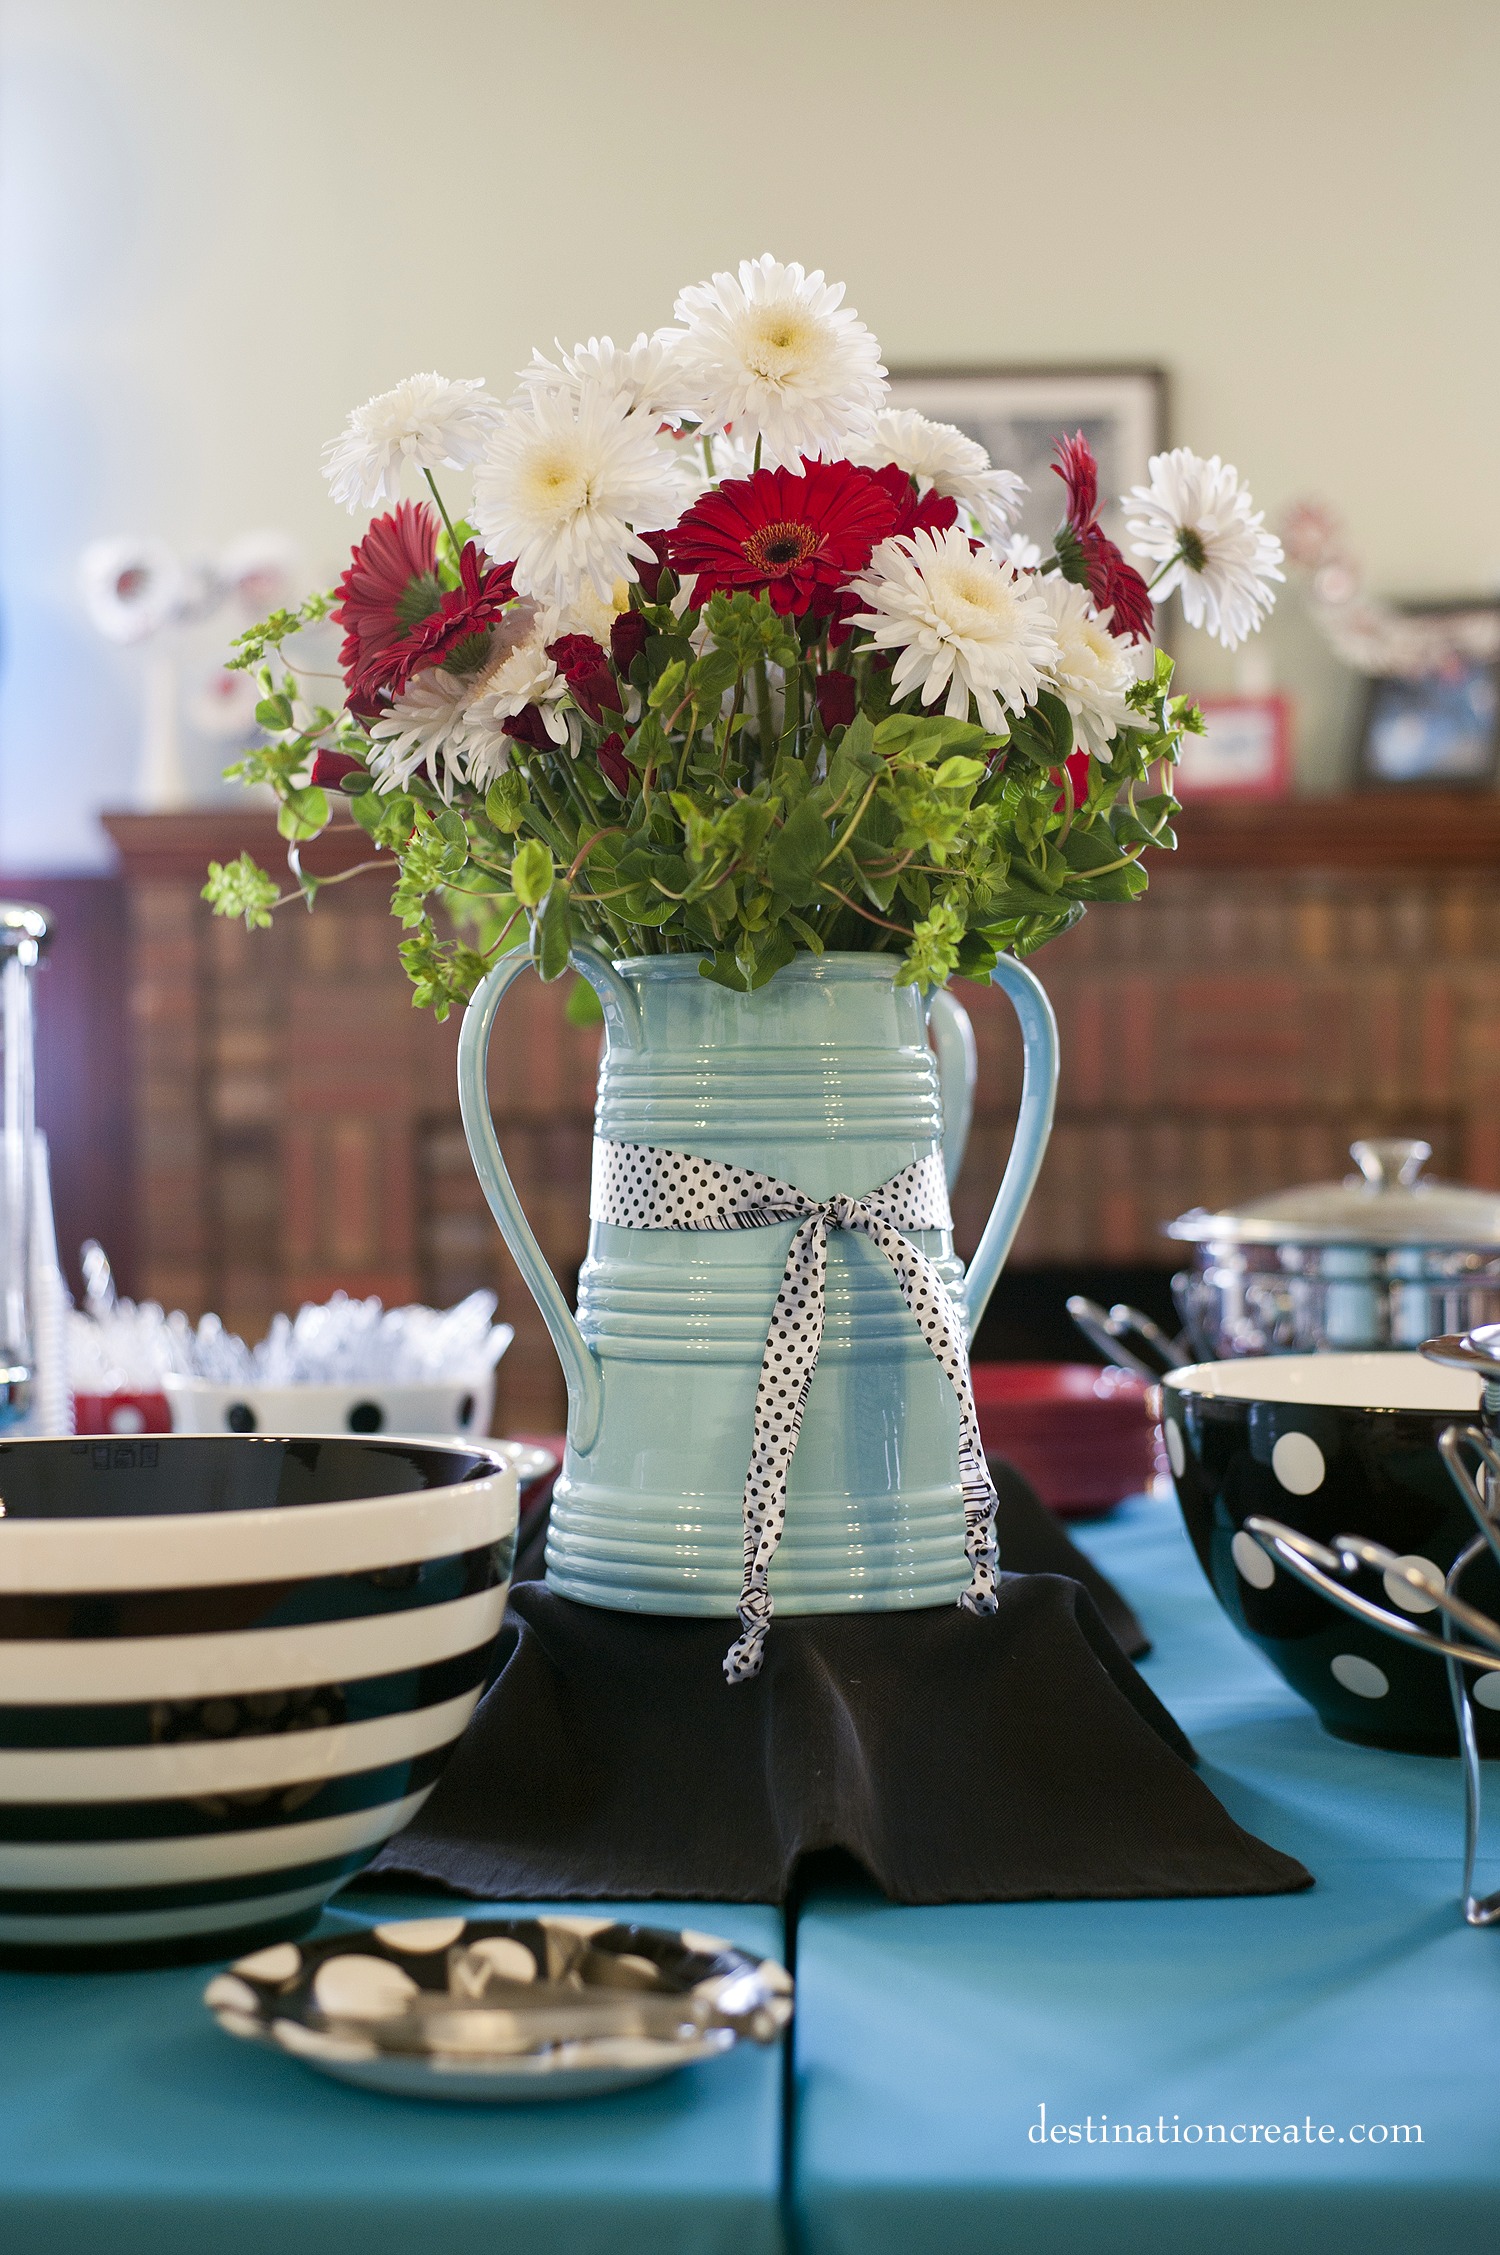 Red and white wedding flowers in turquoise farm vase